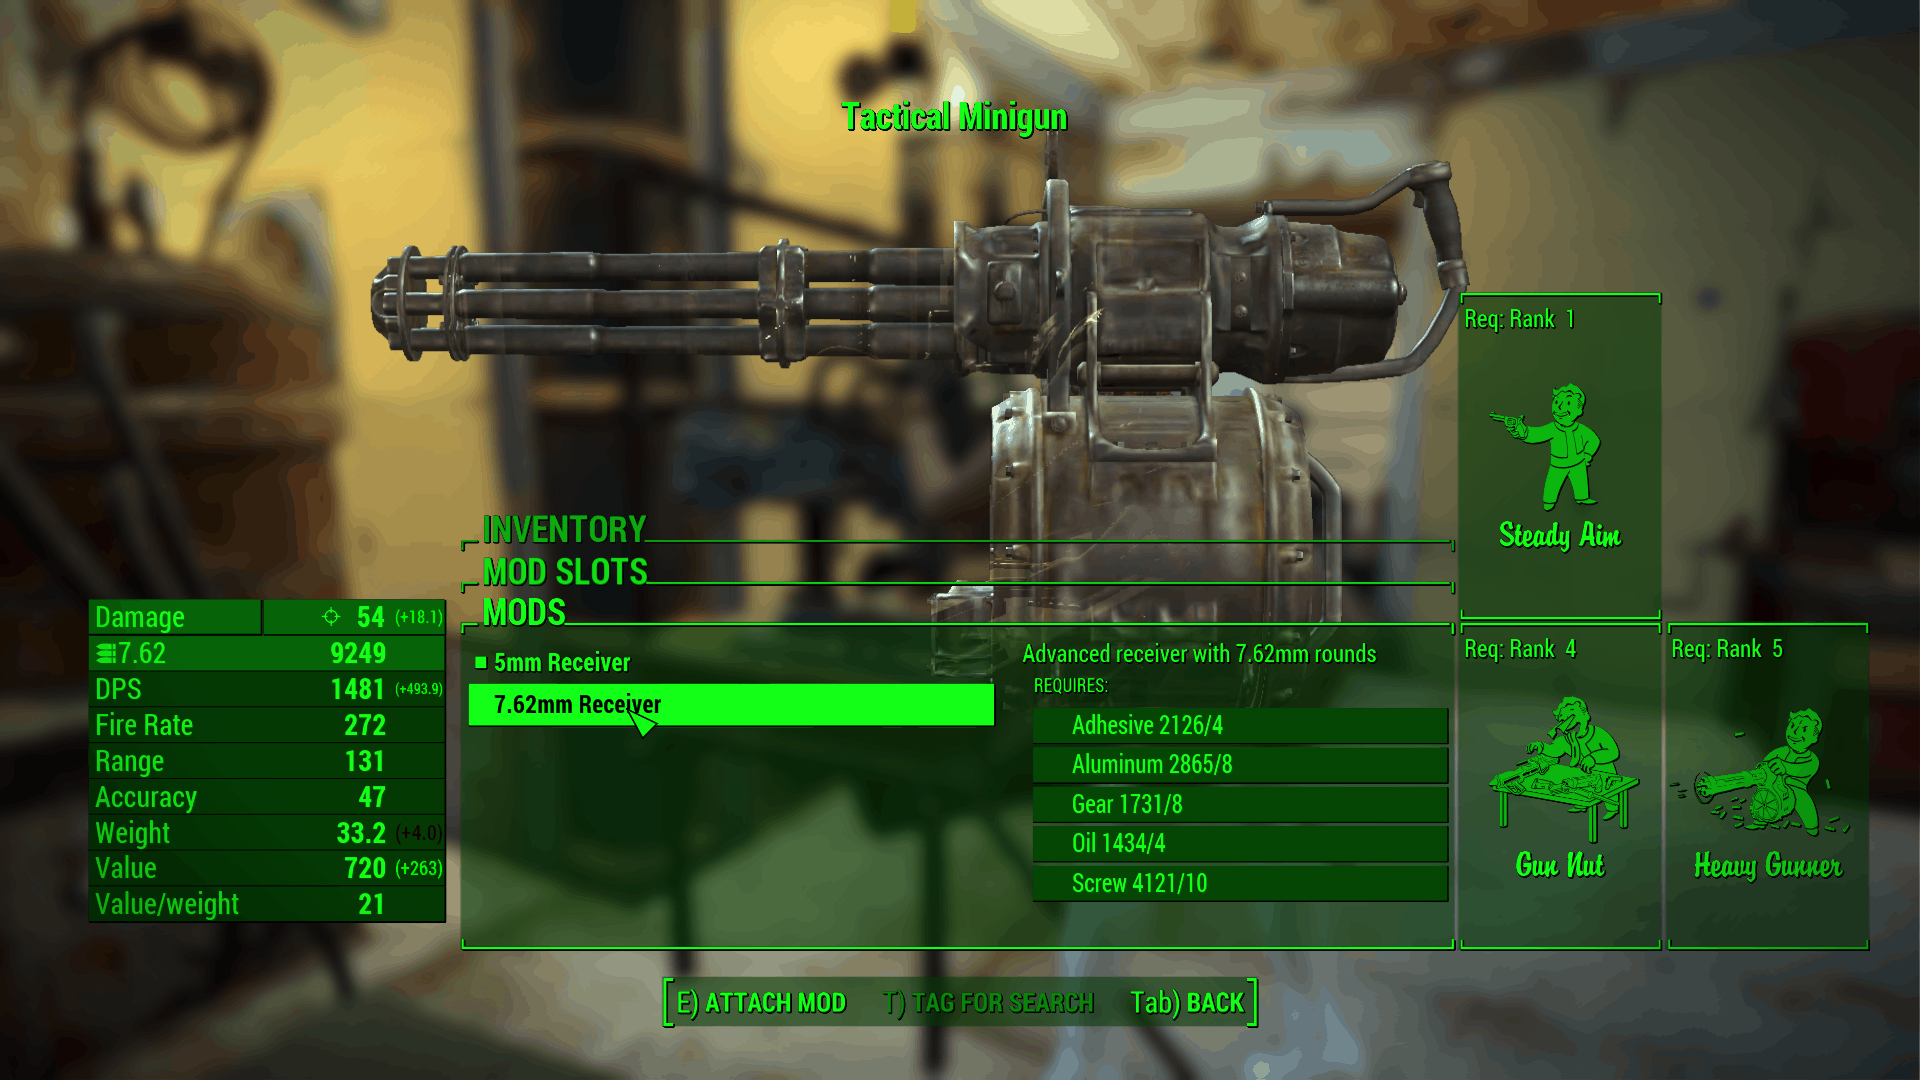 how to get fallout 4 mods